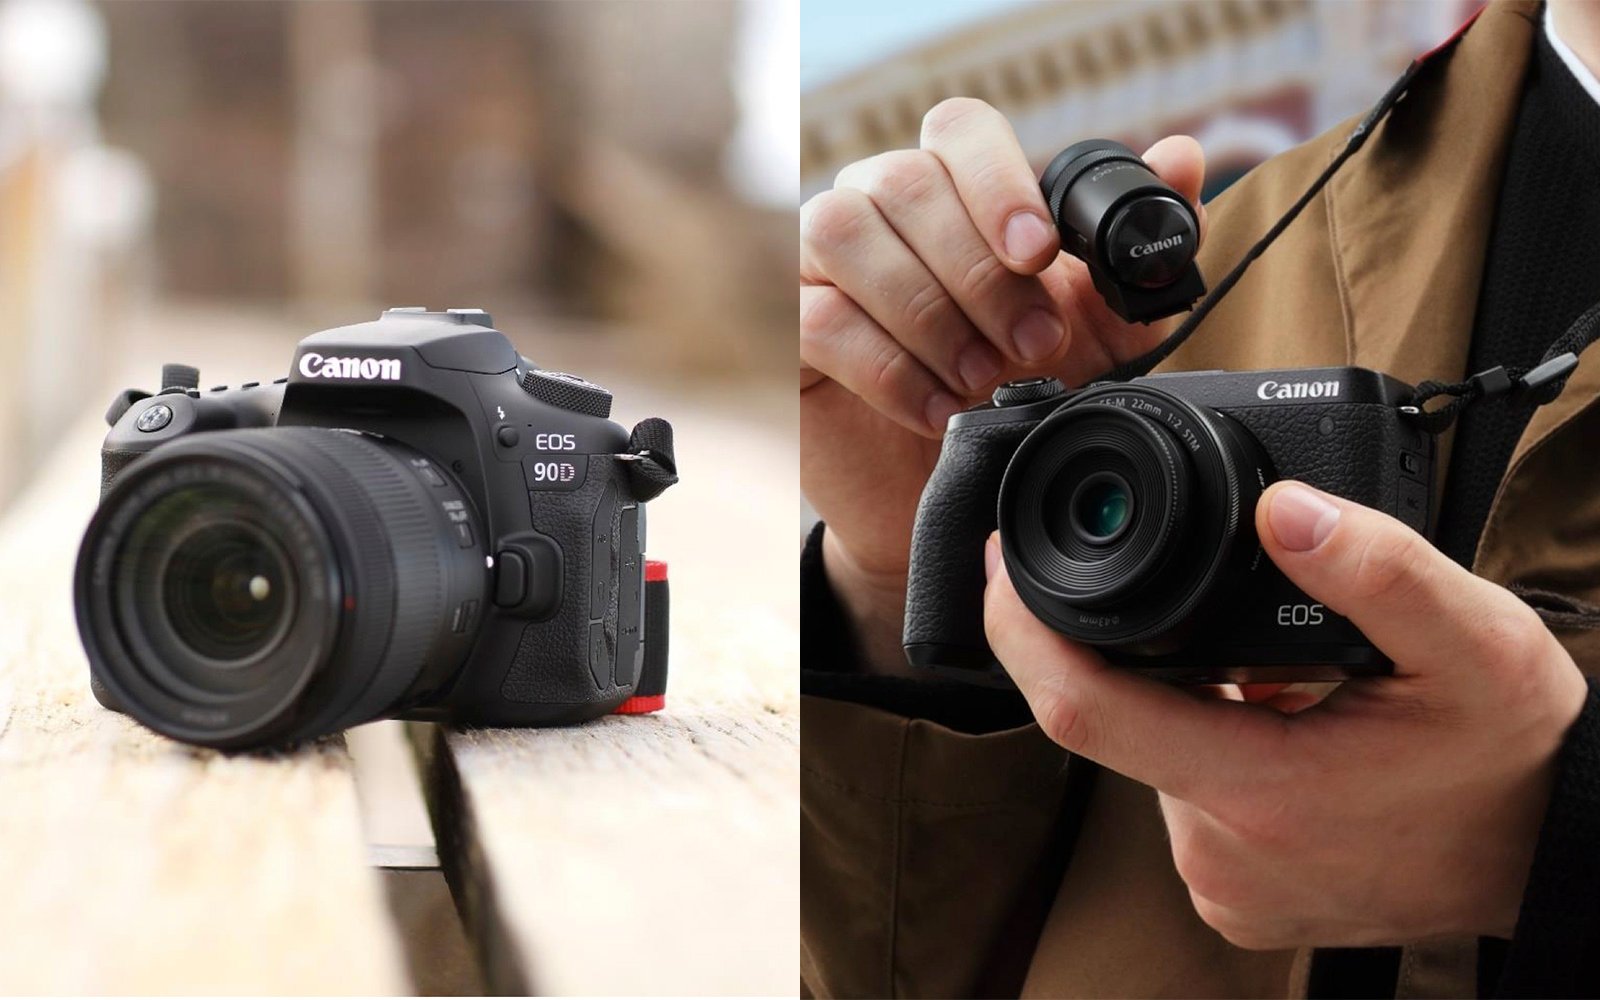 Canon Leaks Full Product Brochures for the Canon 90D and EOS M6 Mark II